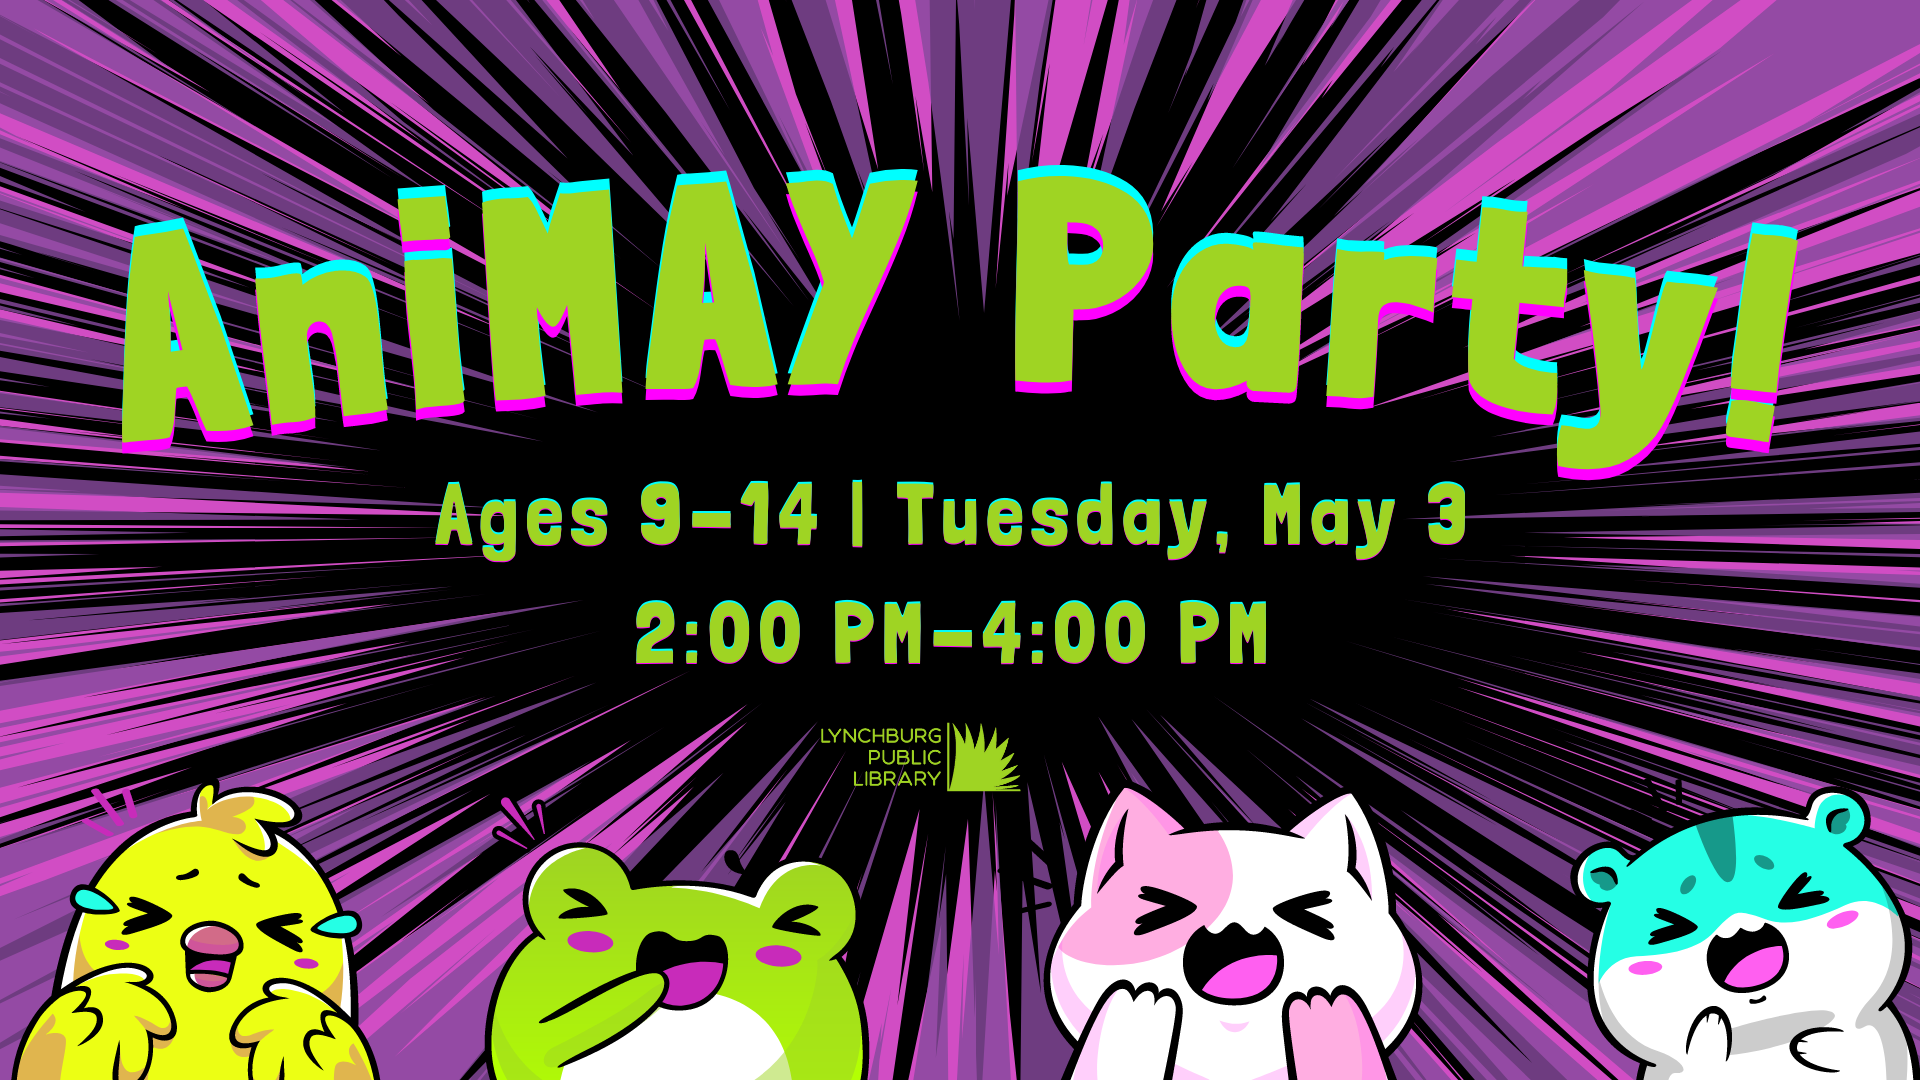 Image of chibi-style chick, frog, cat, and hamster laughing in excitement alongside information about LPL's AniMay Party